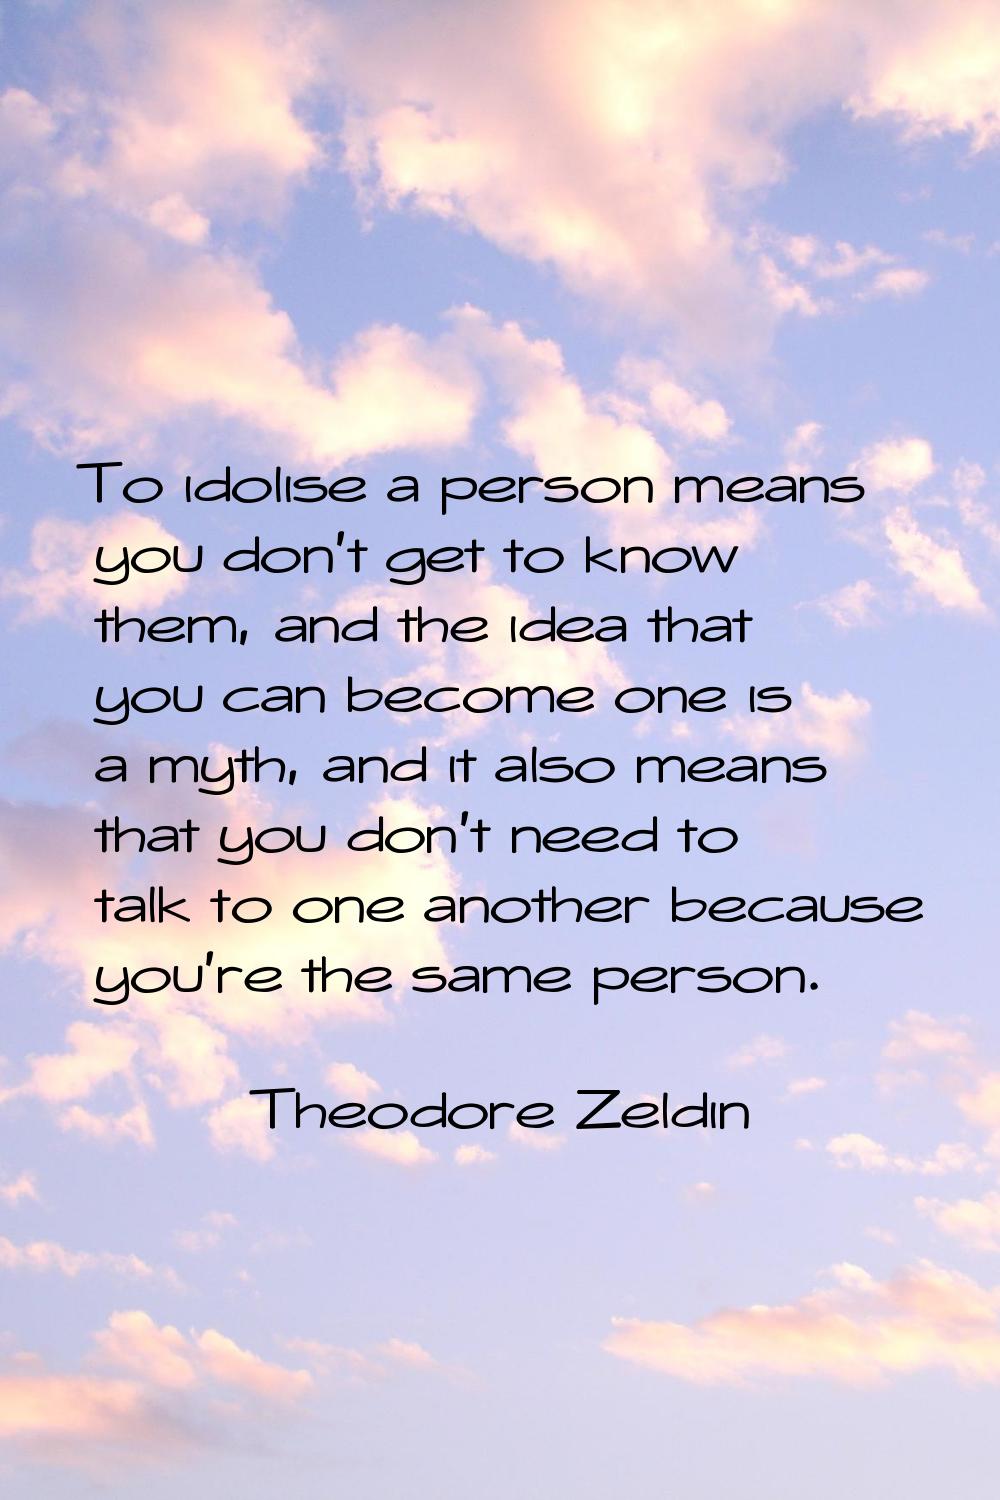 To idolise a person means you don't get to know them, and the idea that you can become one is a myt